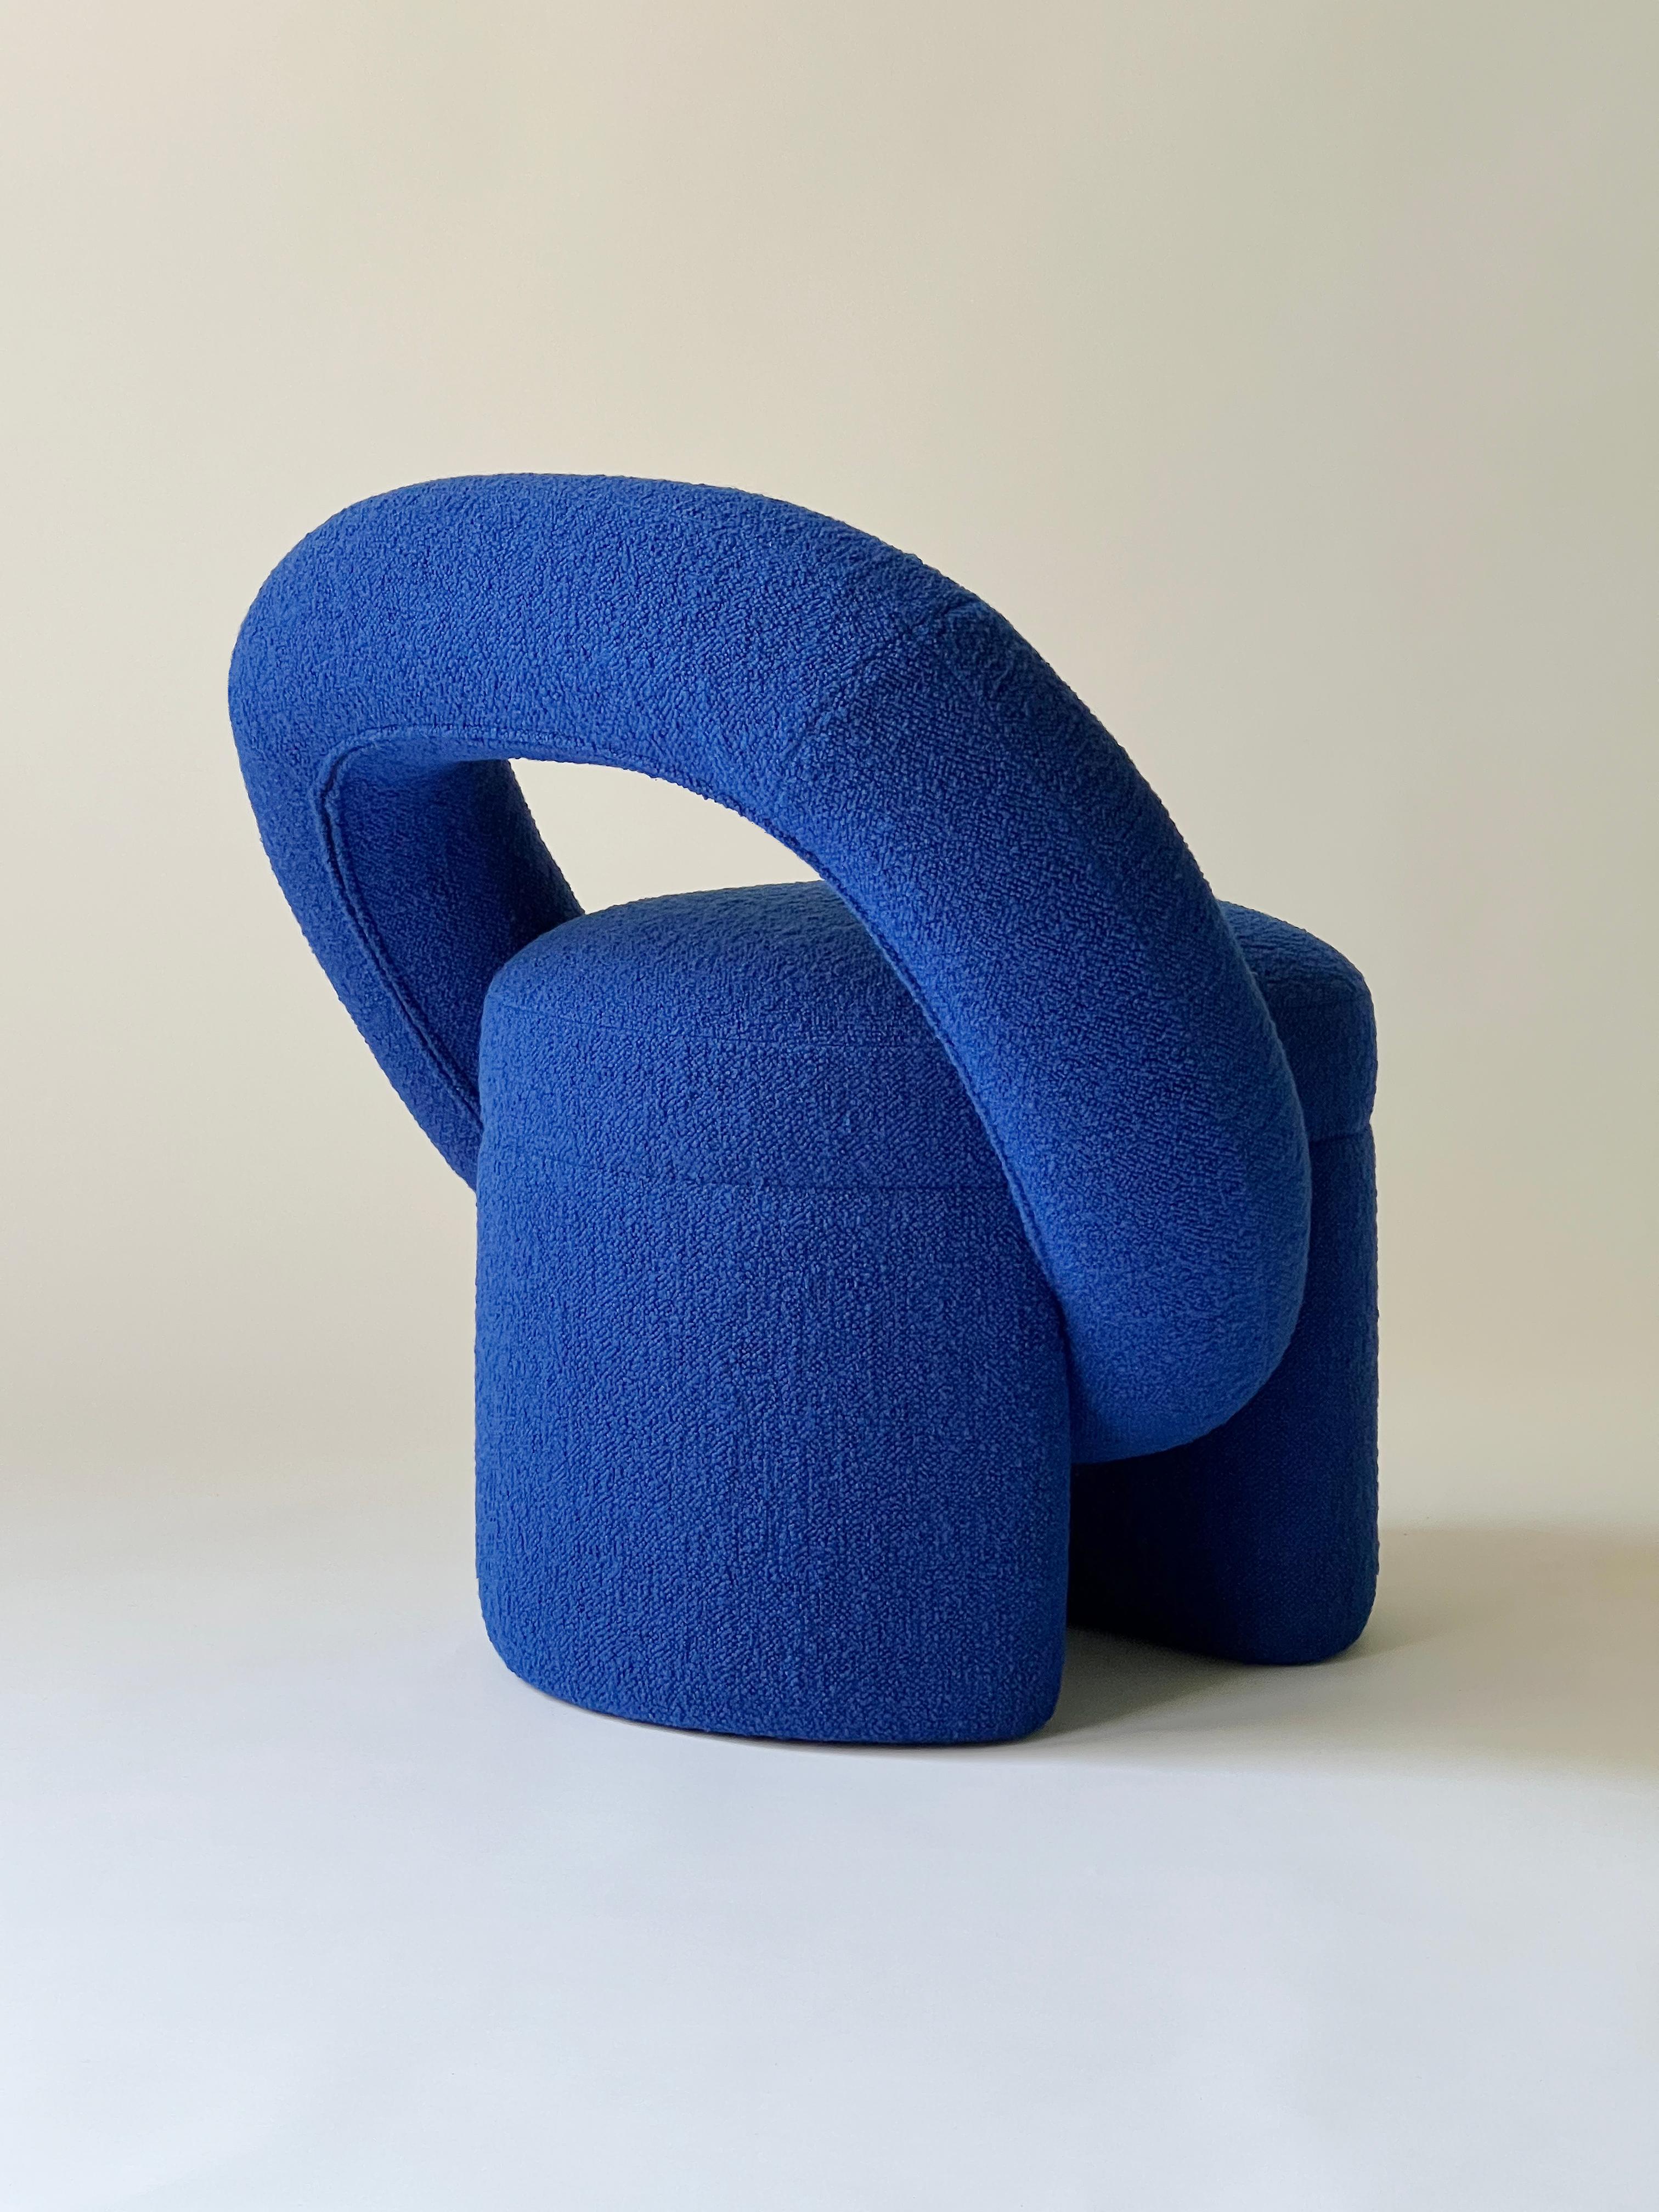 “PLAY” armchair has an unusual shape that was assembled from several geometric elements. The bagel-shaped detail serves the back of the chair.
Handcrafted in Ukraine, this armchair embodies the perfect blend of comfort and style. Its sleek design